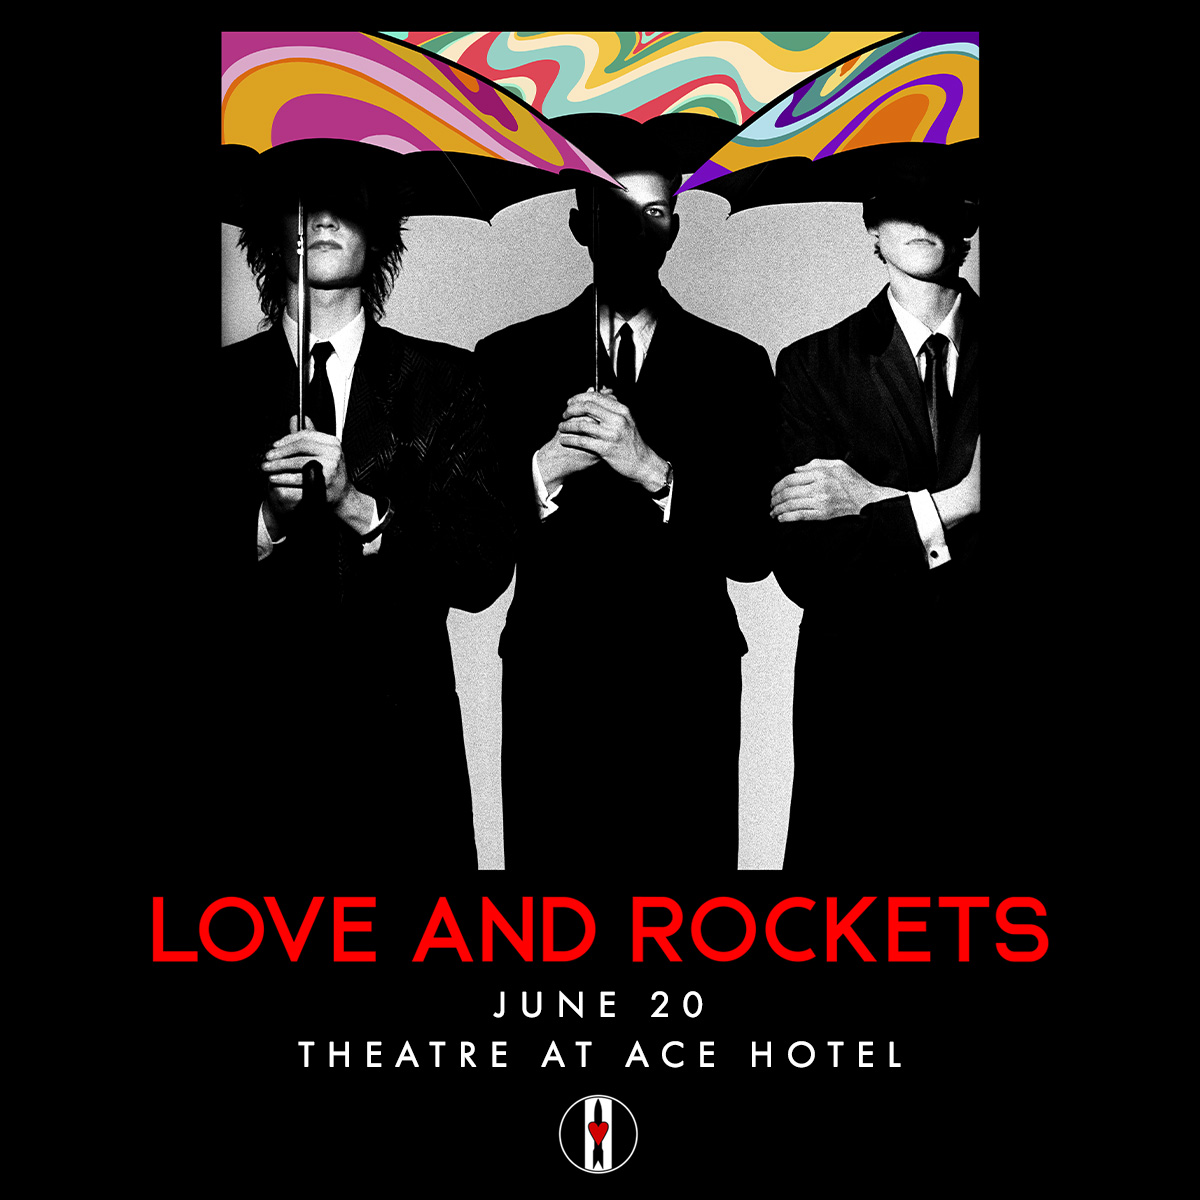 Pictured: Three men pictured in black suits, holding umbrellas with the top of their faces covered. Their faces are covered with the tops of umbrella that are colorful. Bottom Text: Love and Rockets June 20 Theatre at Ace Hotel